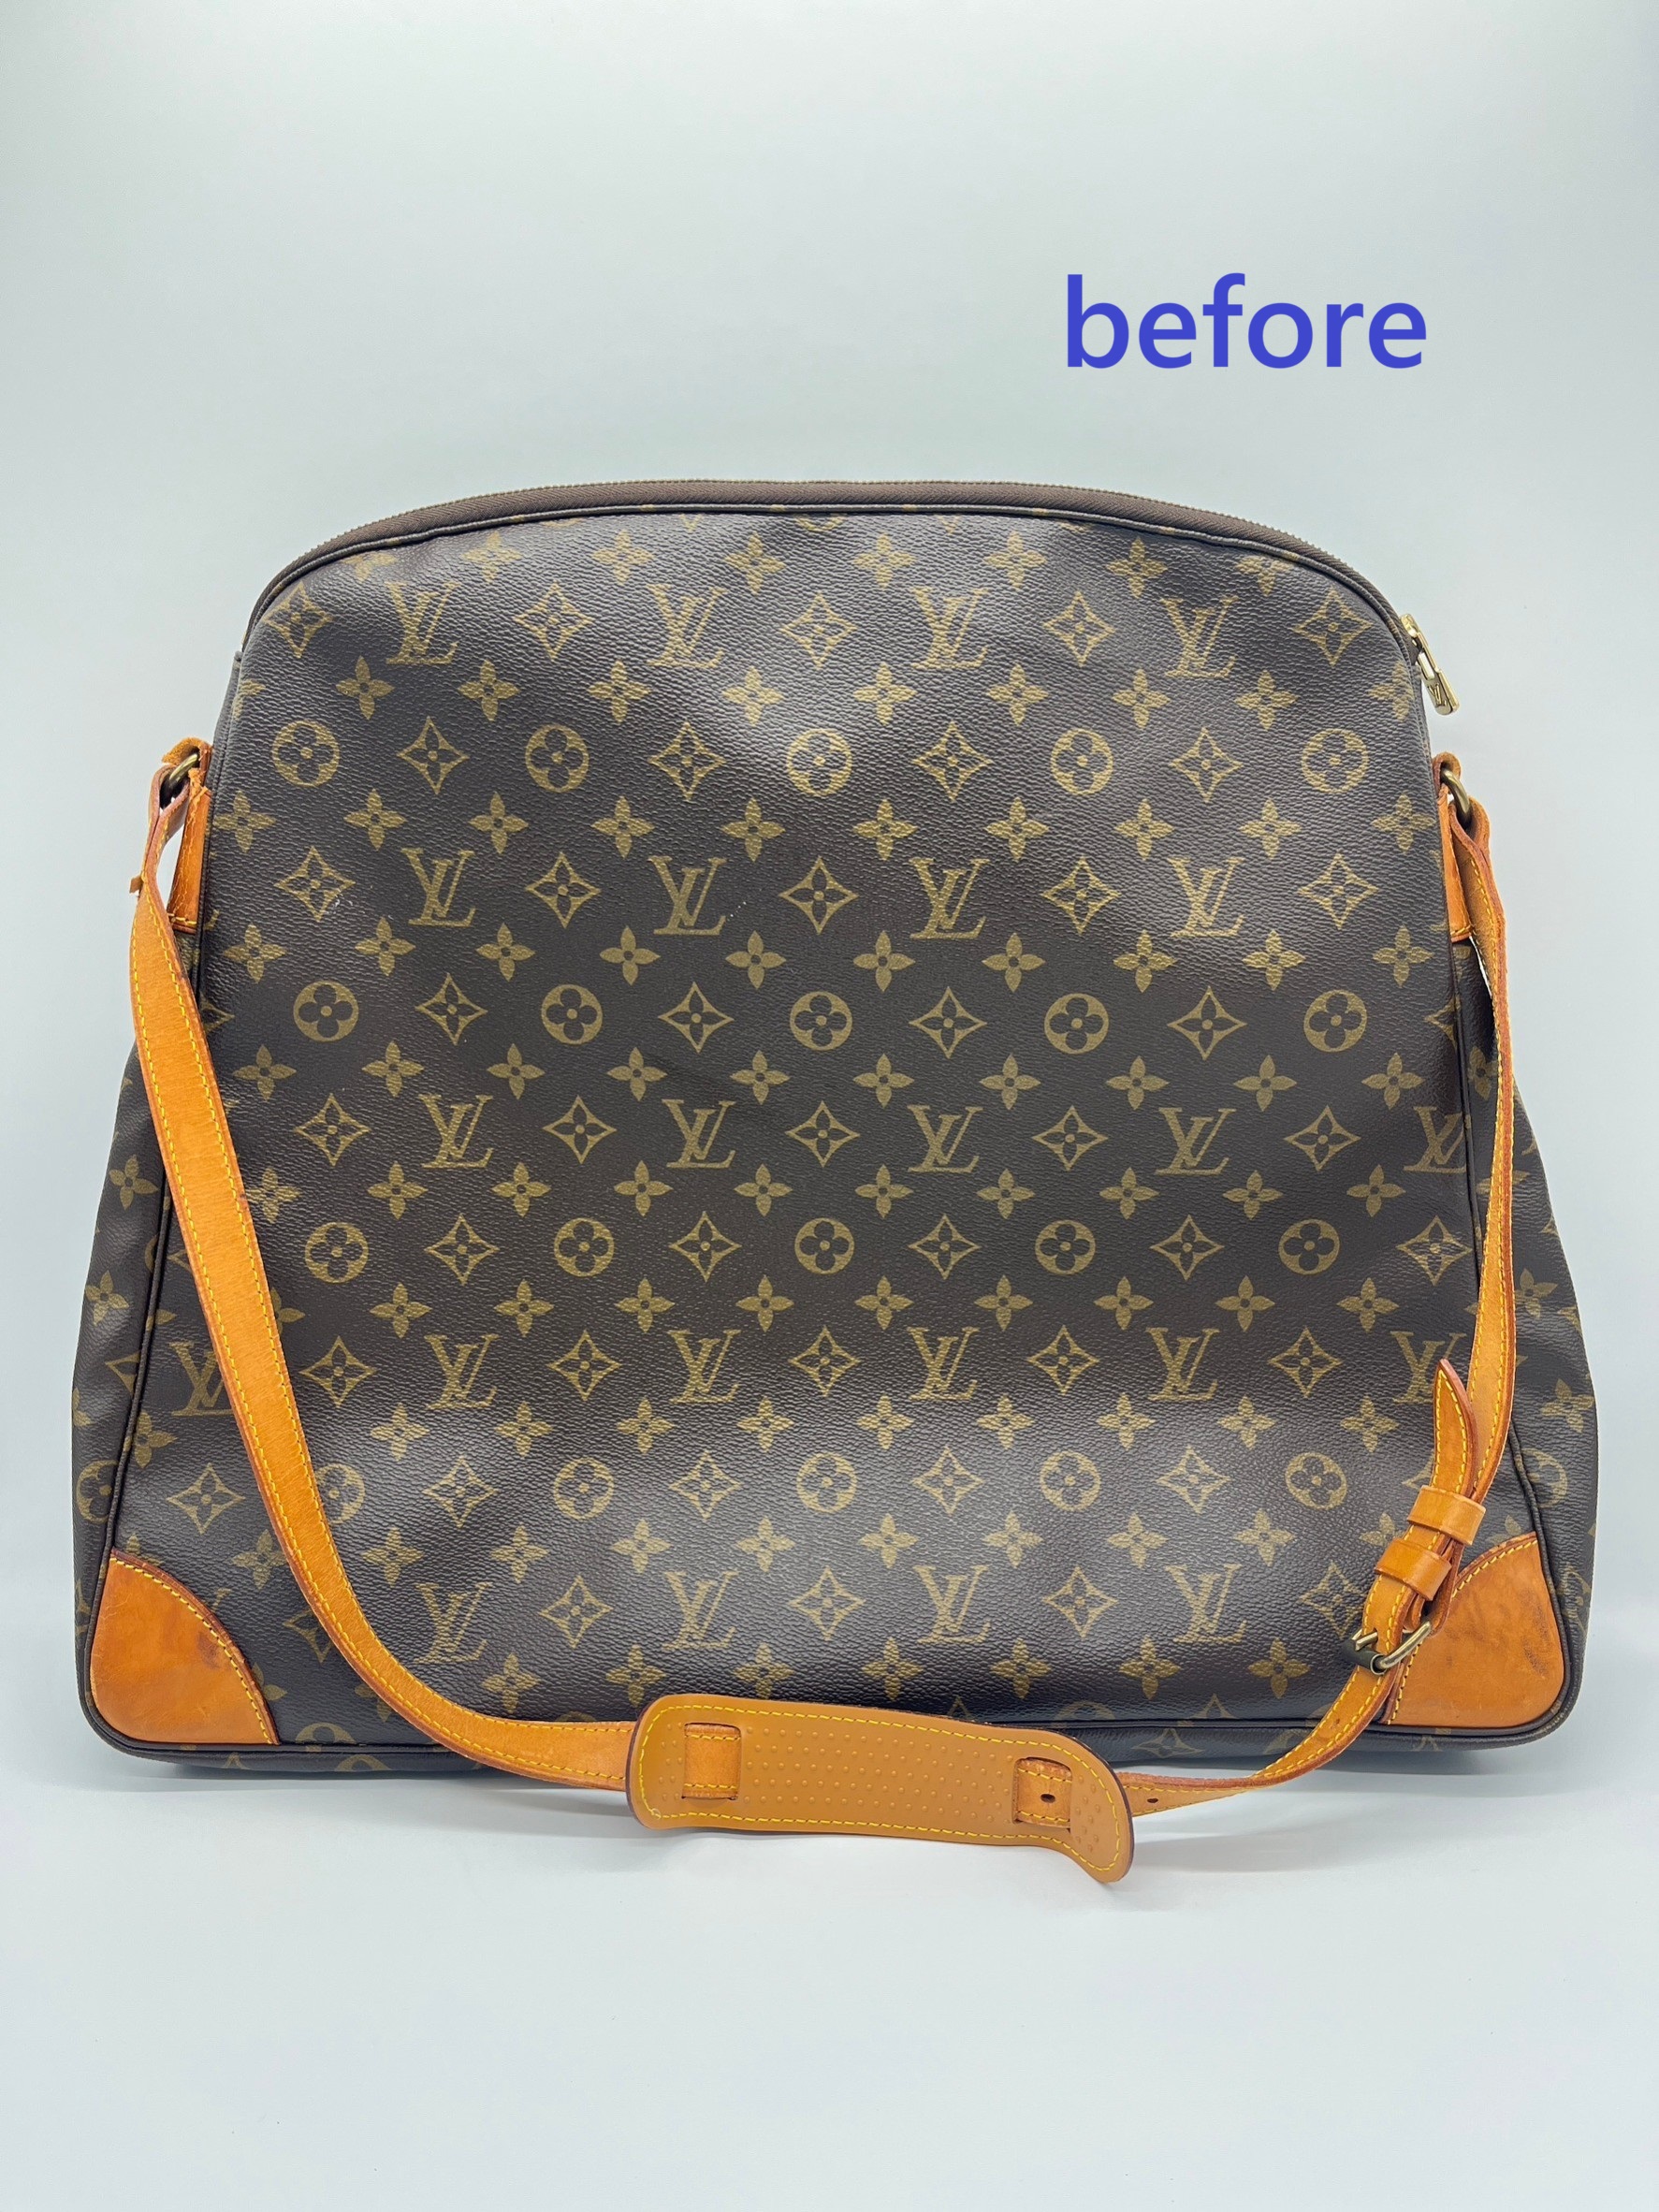 Louis Vuitton(ルイヴィトン)-サックバラード-付け根作製交換【Before/After】